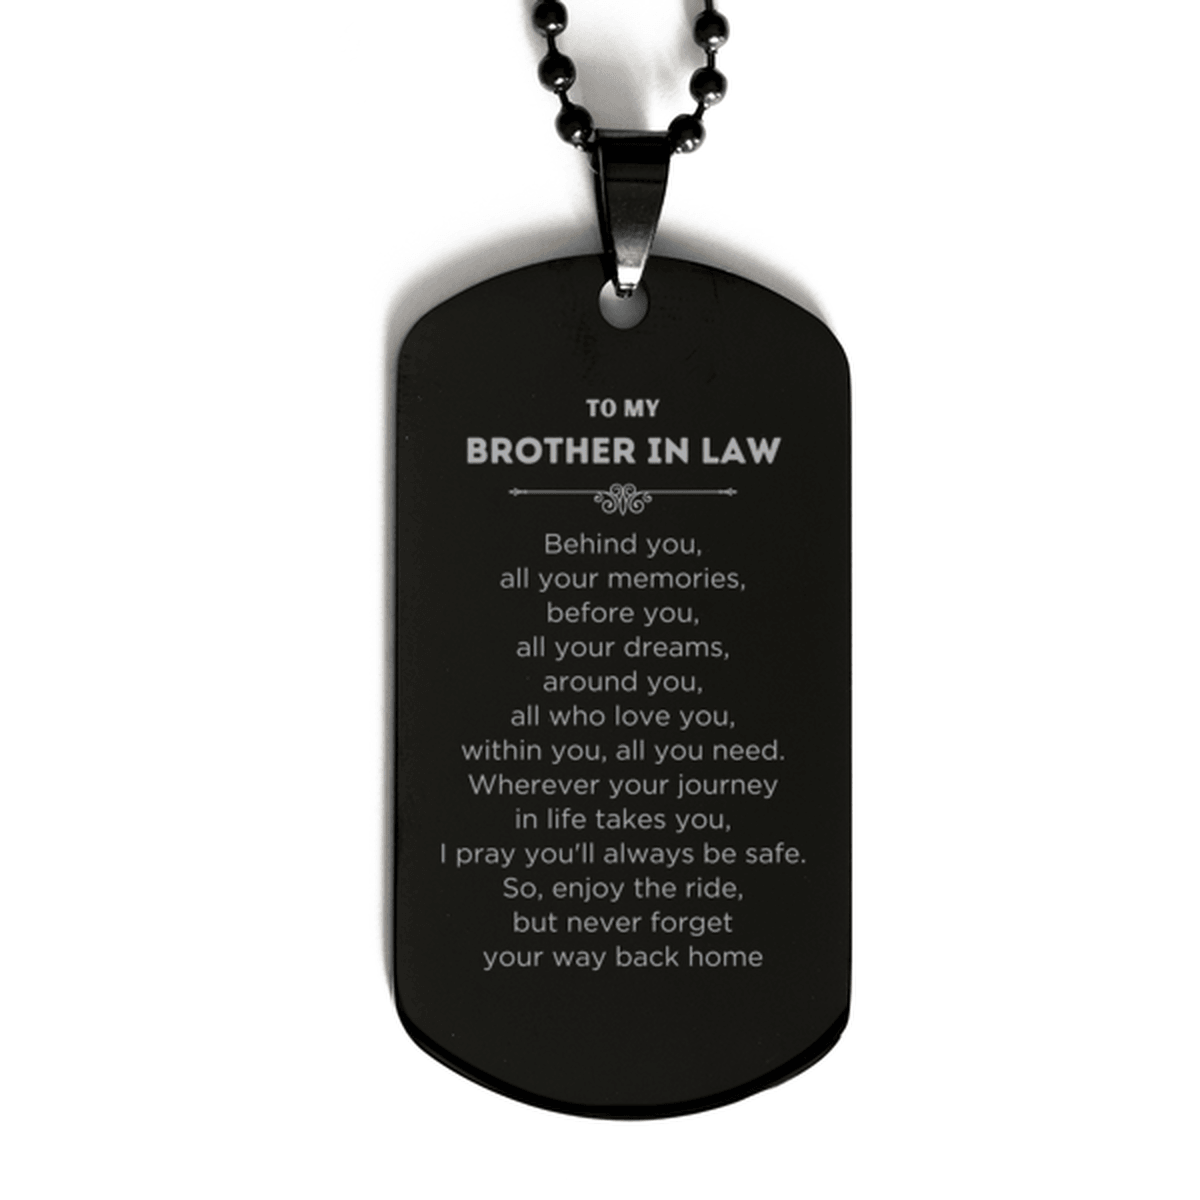 To My Brother In Law Gifts, Inspirational Brother In Law Black Dog Tag, Sentimental Birthday Christmas Unique Gifts For Brother In Law Behind you, all your memories, before you, all your dreams, around you, all who love you, within you, all you need - Mallard Moon Gift Shop